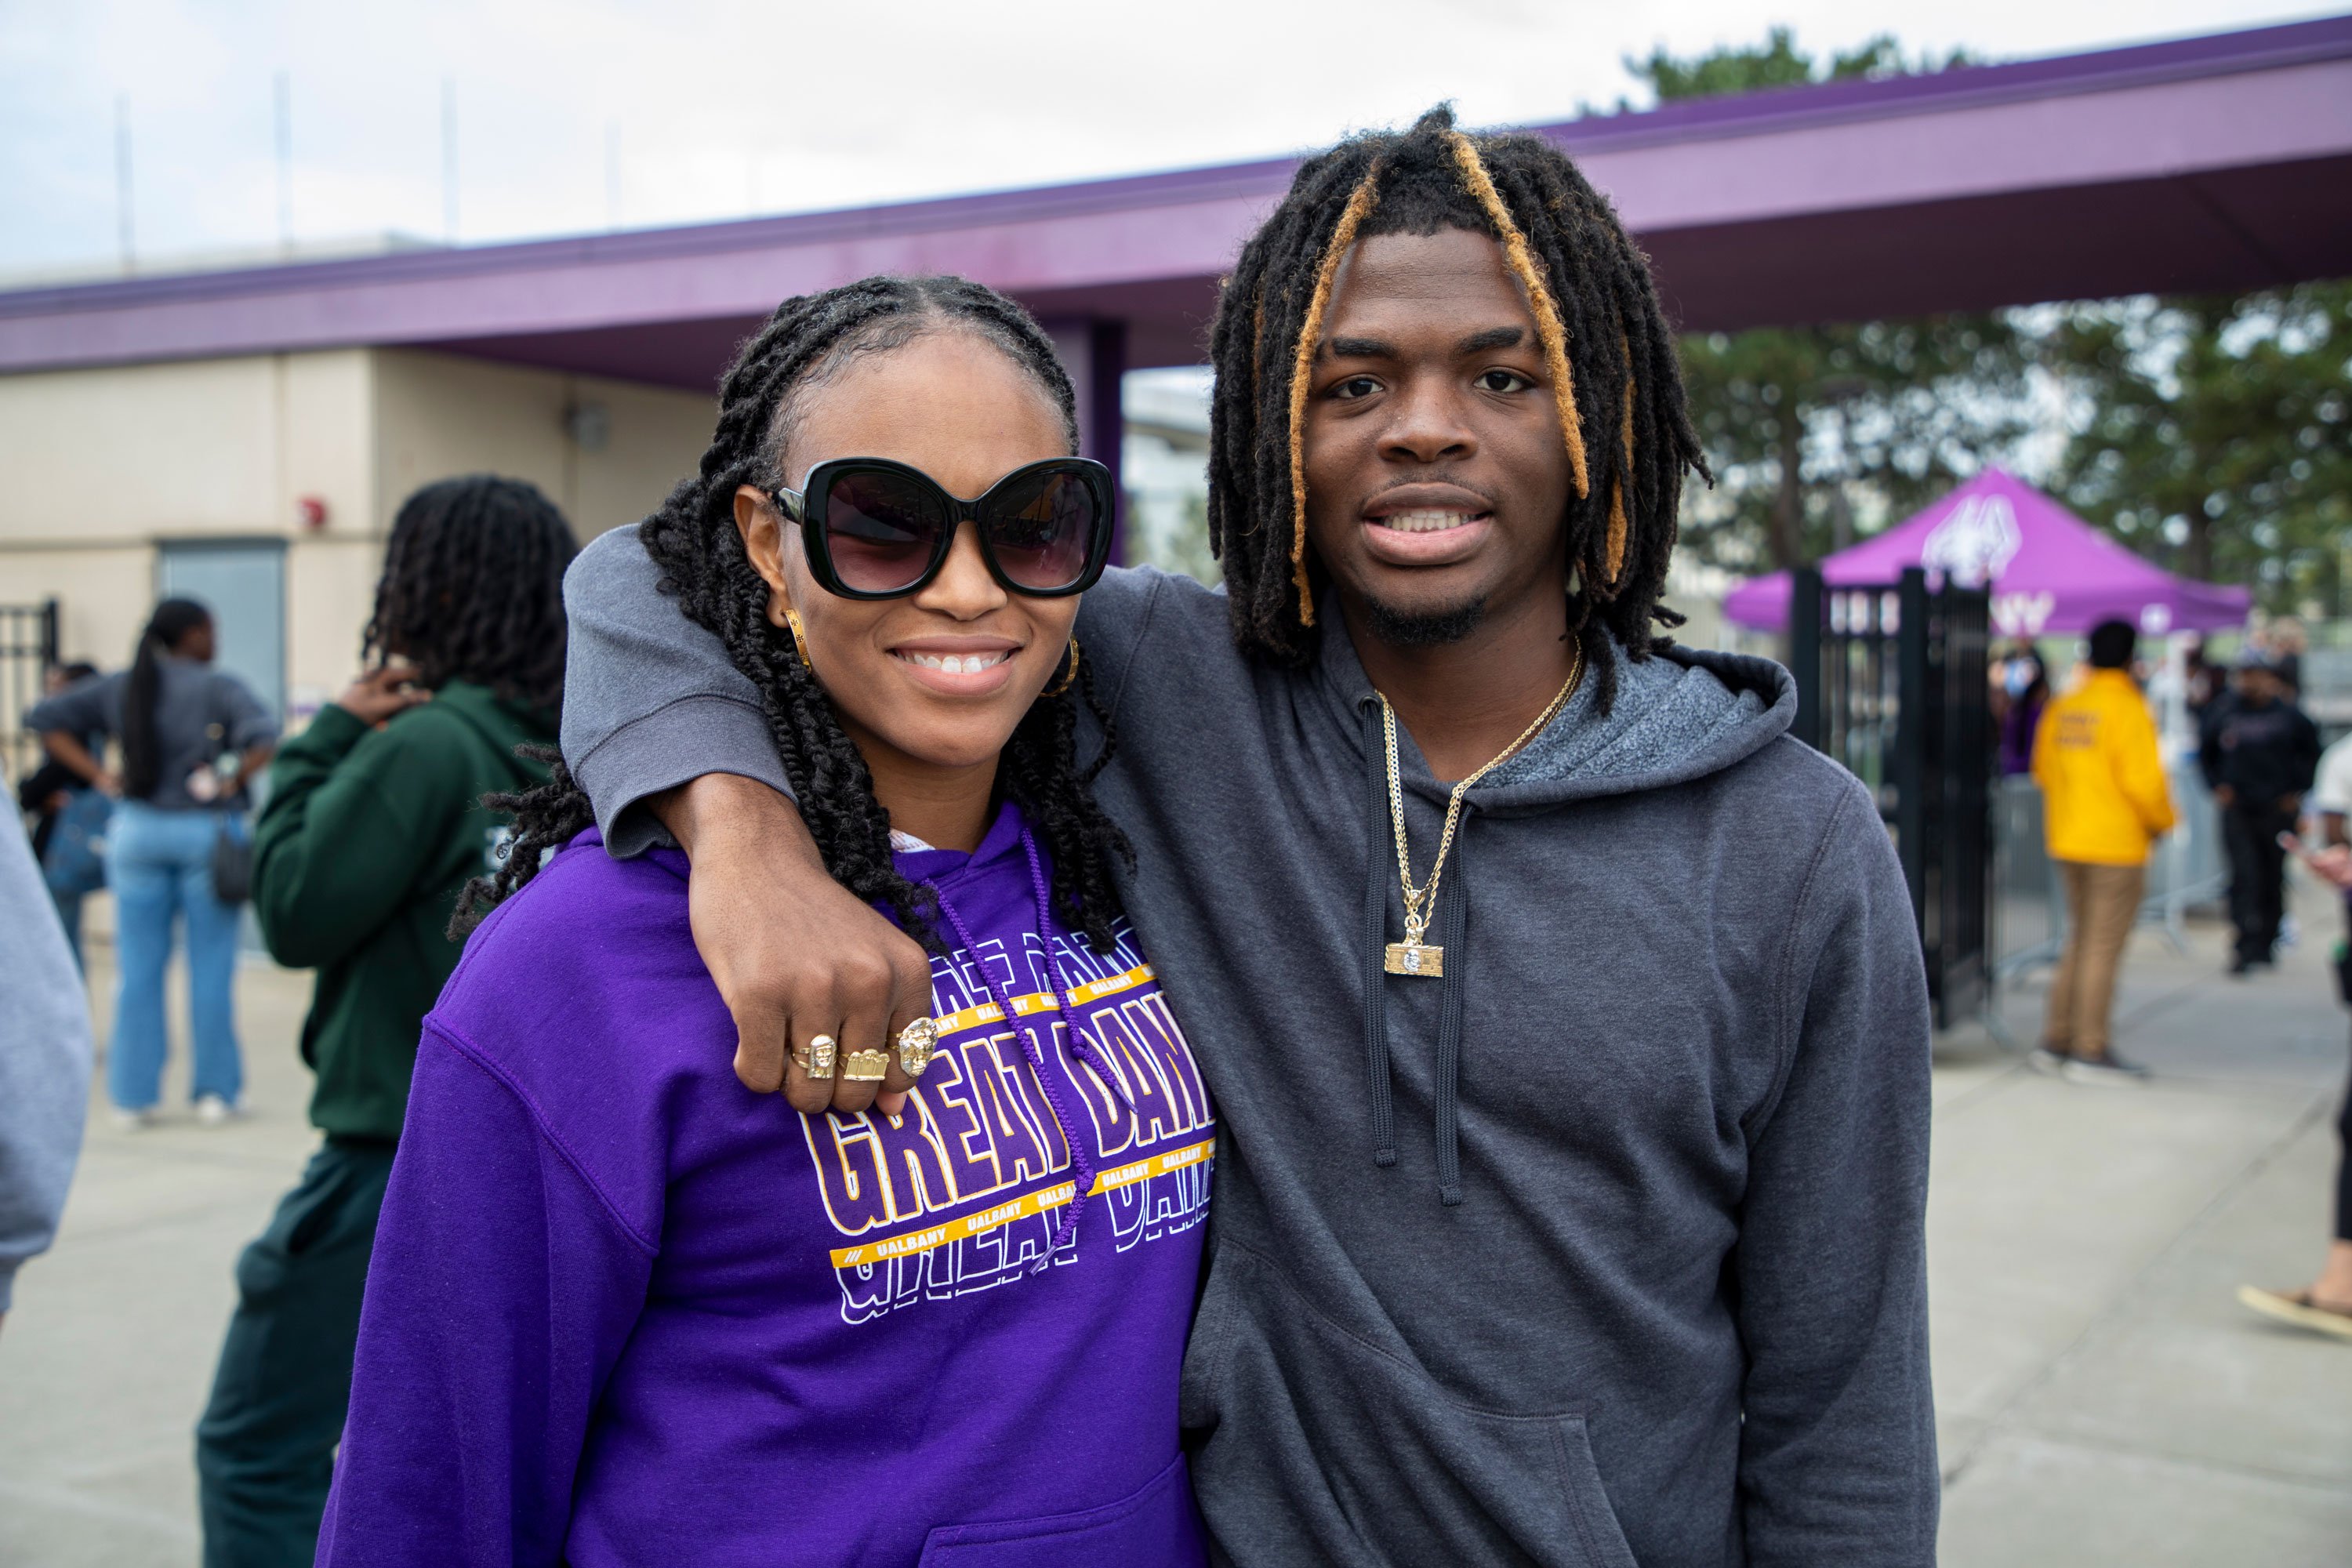 Two adults, one of whom is wearing a purple UAlbany sweatshirt, smile as they pose for a photo.